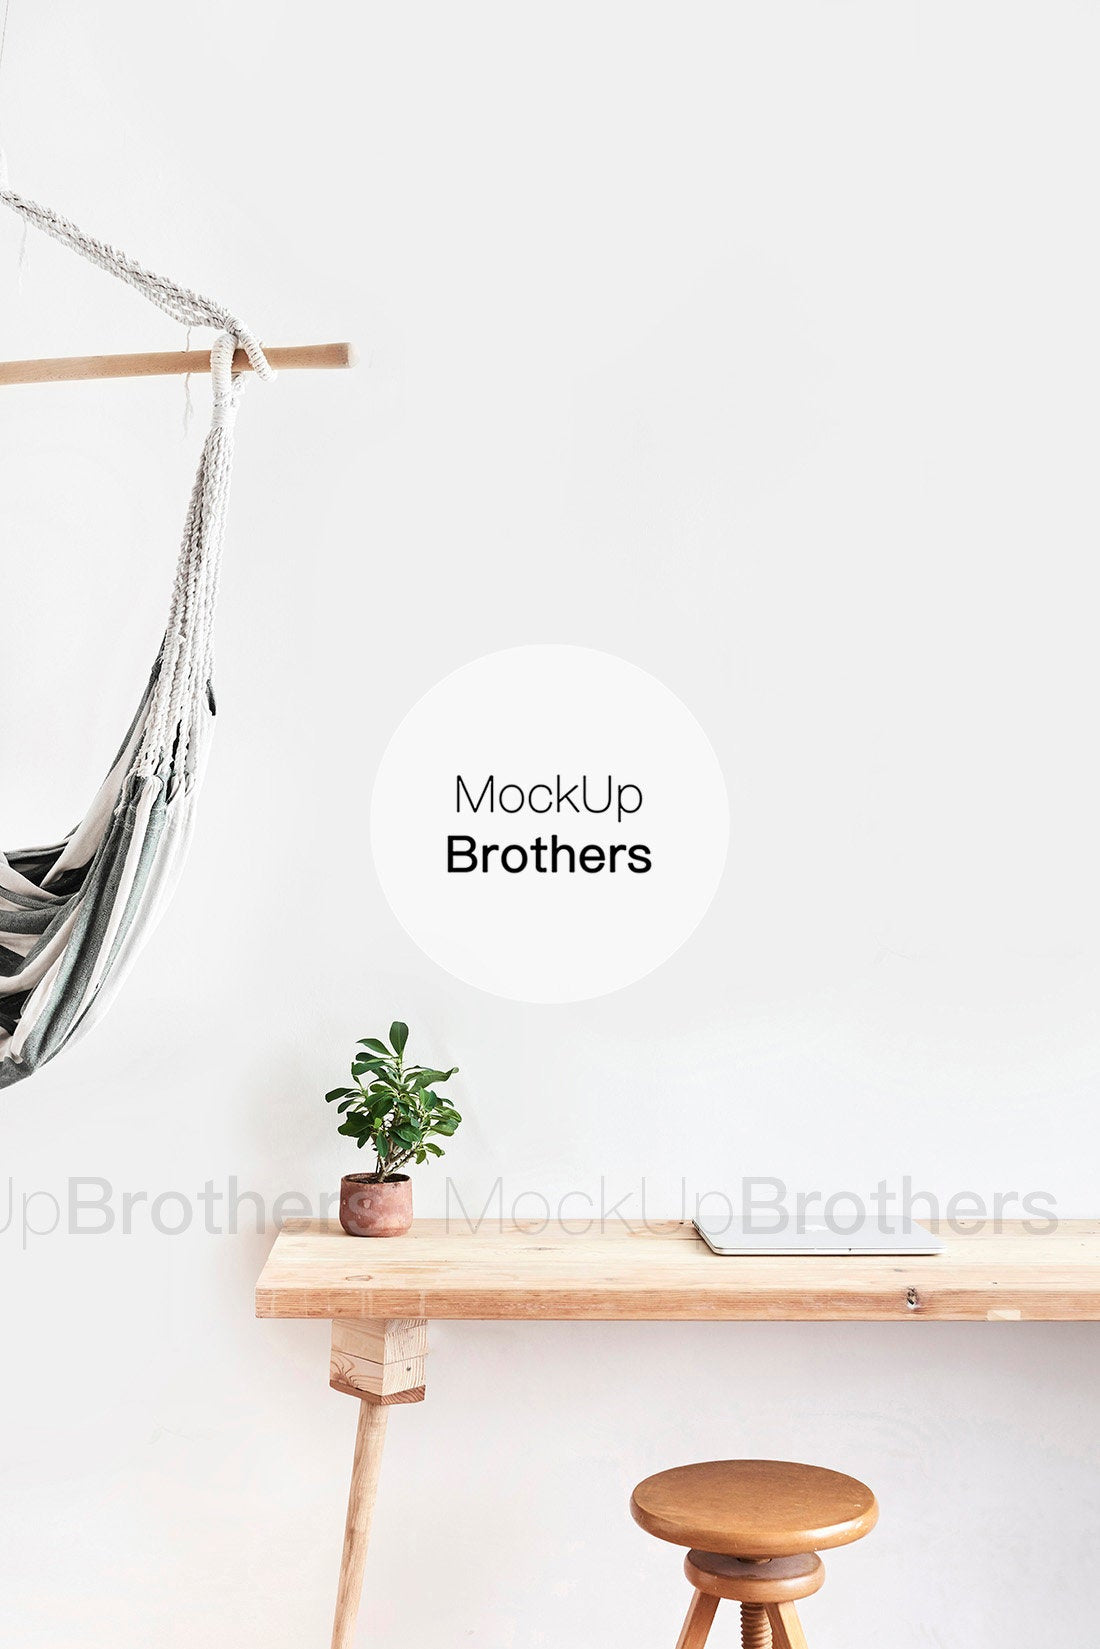 Nordic interior stock photography by Mockup Brothers